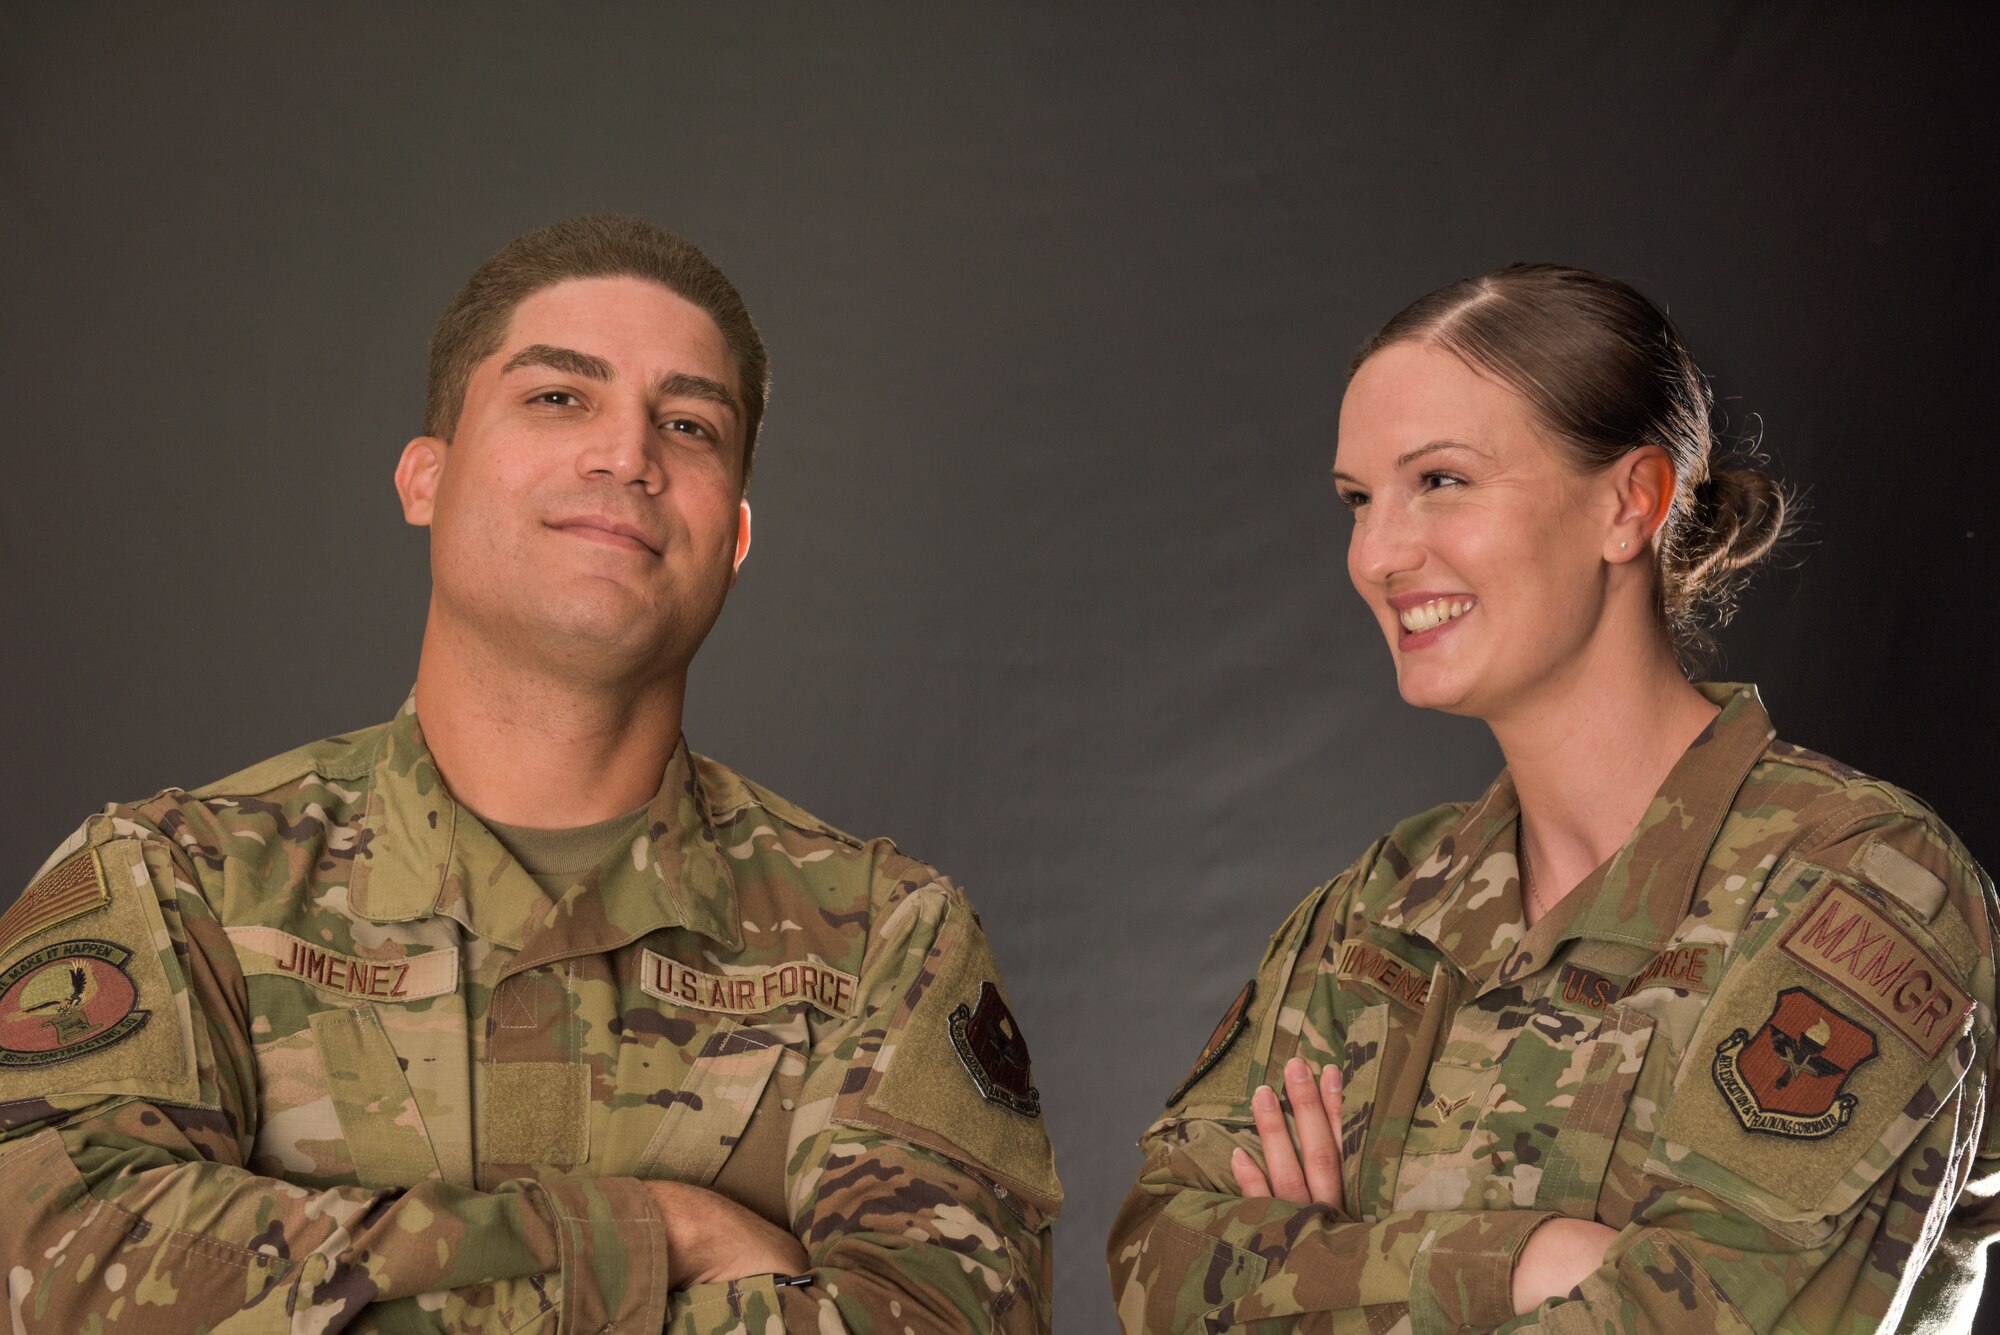 U.S. Air Force Airman Basic Richard Jimenez, 56th Contracting Squadron contract specialist, and his wife, U.S. Air Force Airman 1st Class Jenna Jimenez, 308th Aircraft Maintenance Unit analyst, pose together Nov. 5, 2021, at Luke Air Force Base, Arizona.